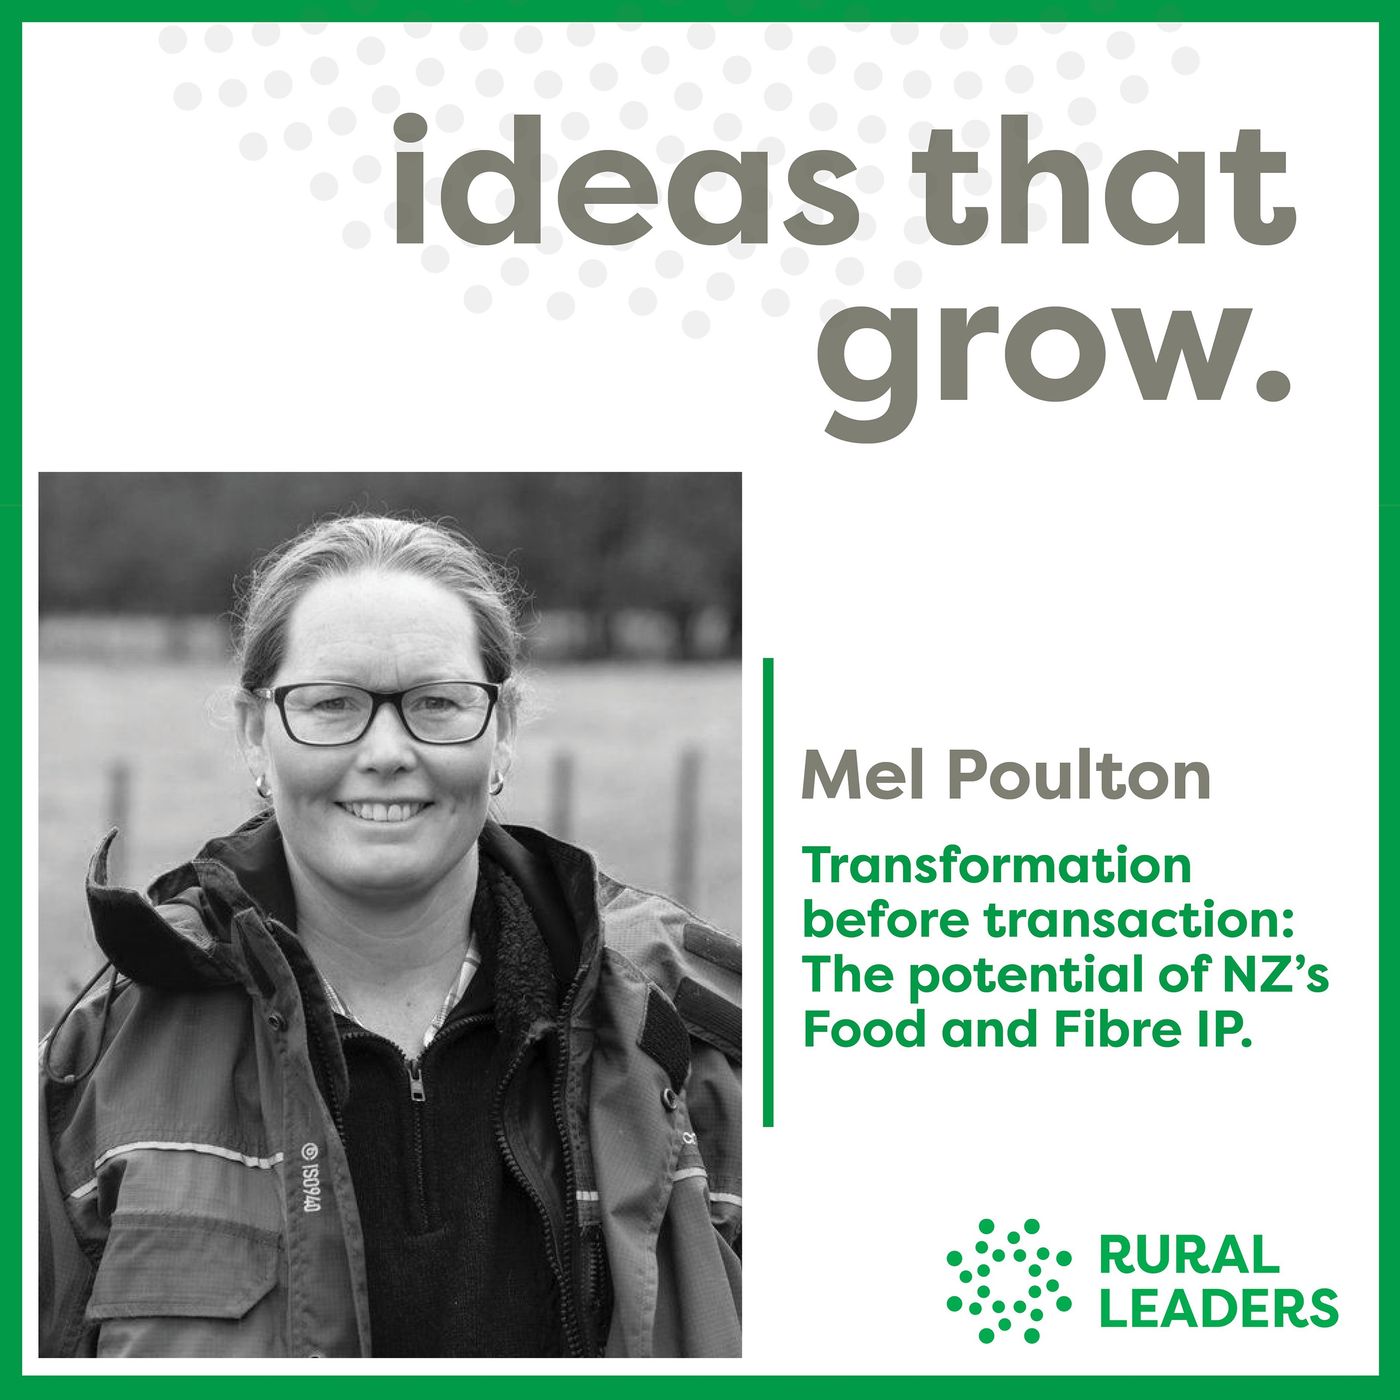 Mel Poulton - Transformation before transaction: The potential of NZ’s Food and Fibre IP.